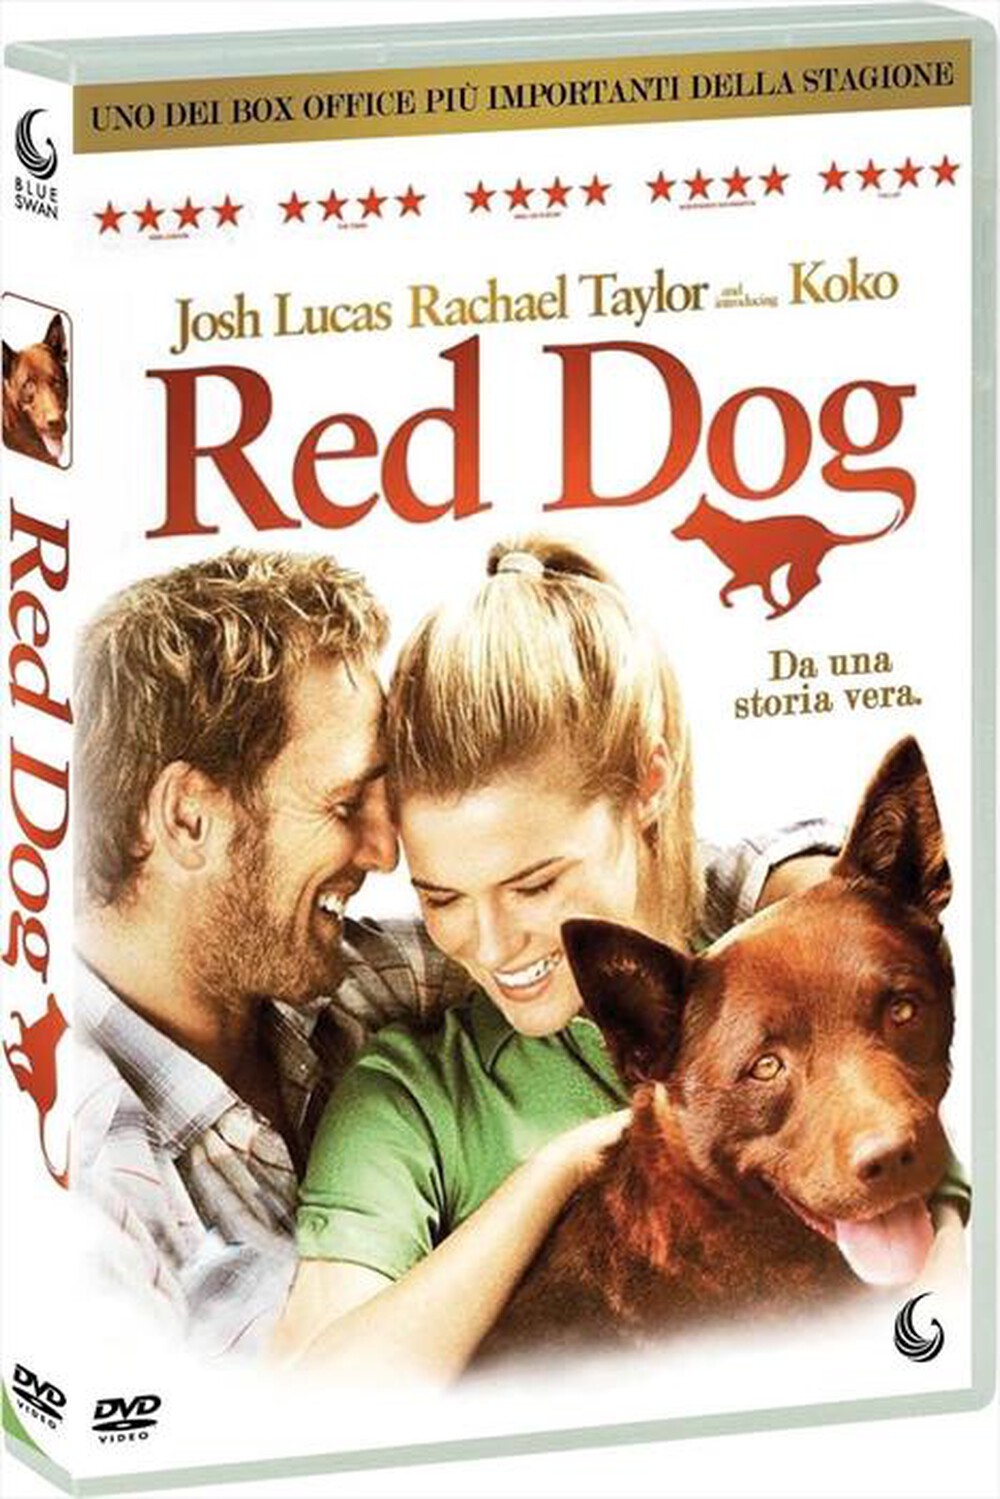 "EAGLE PICTURES - Red Dog"